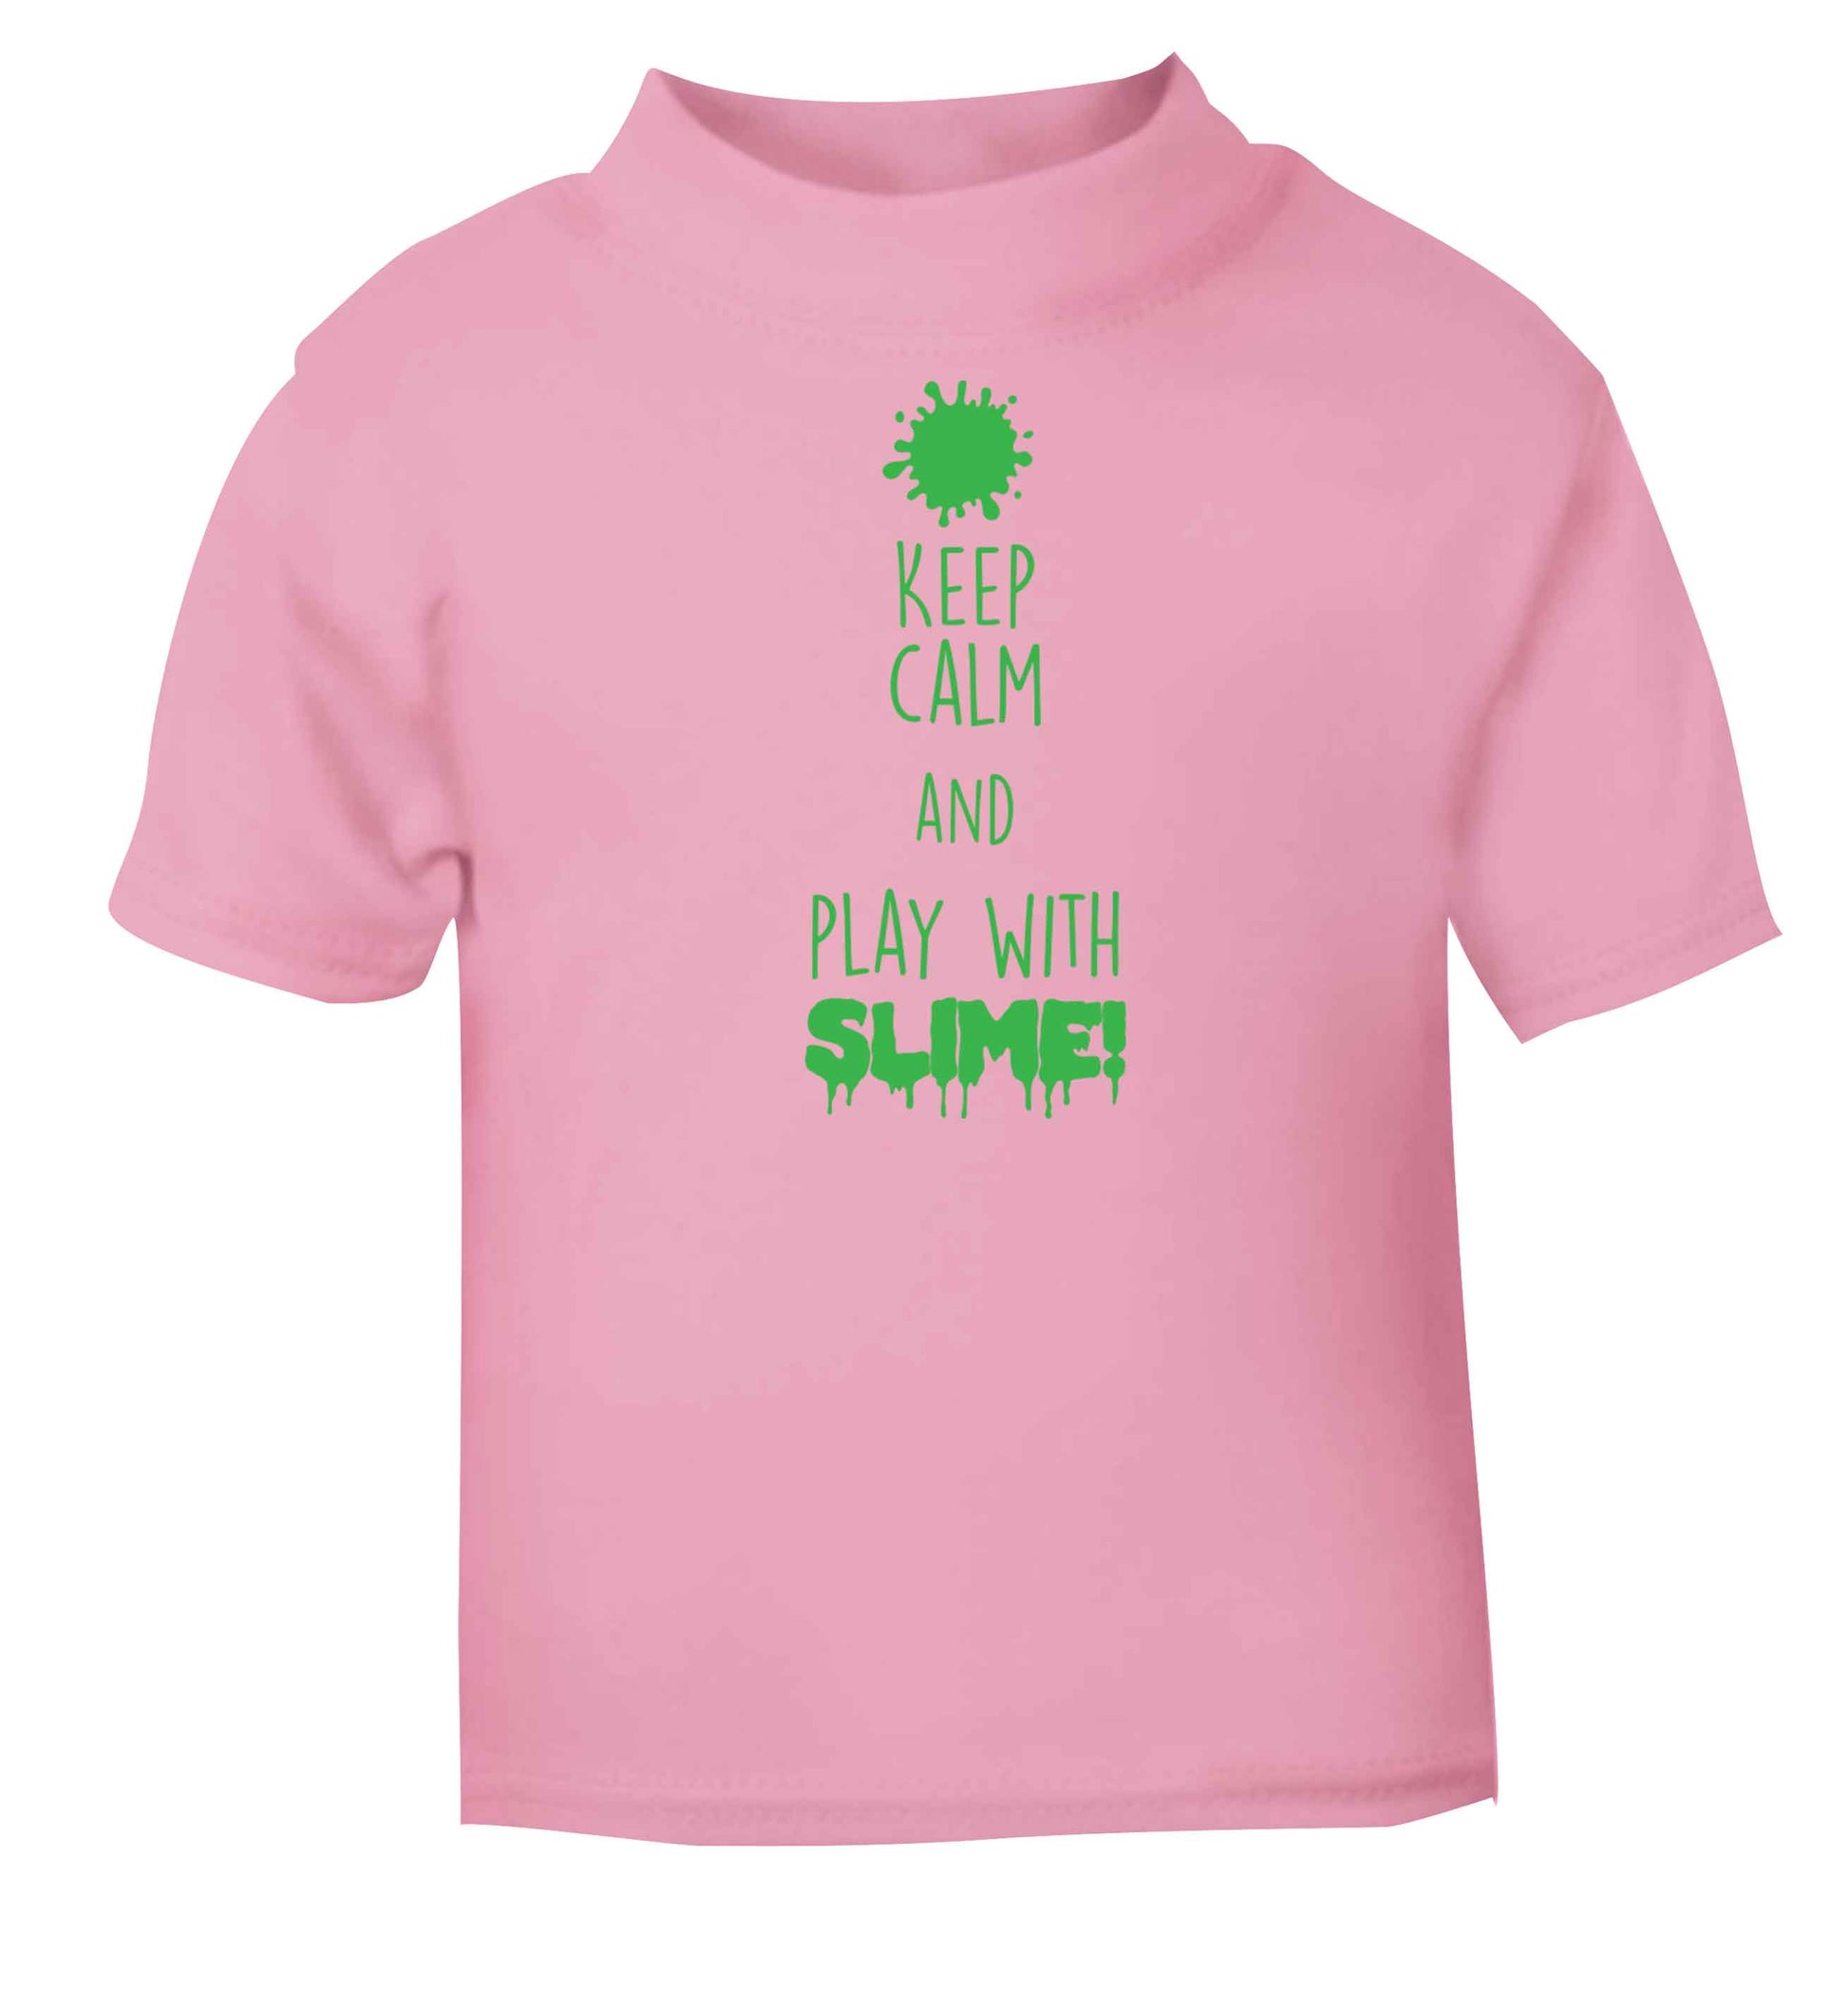 Neon green keep calm and play with slime!light pink baby toddler Tshirt 2 Years